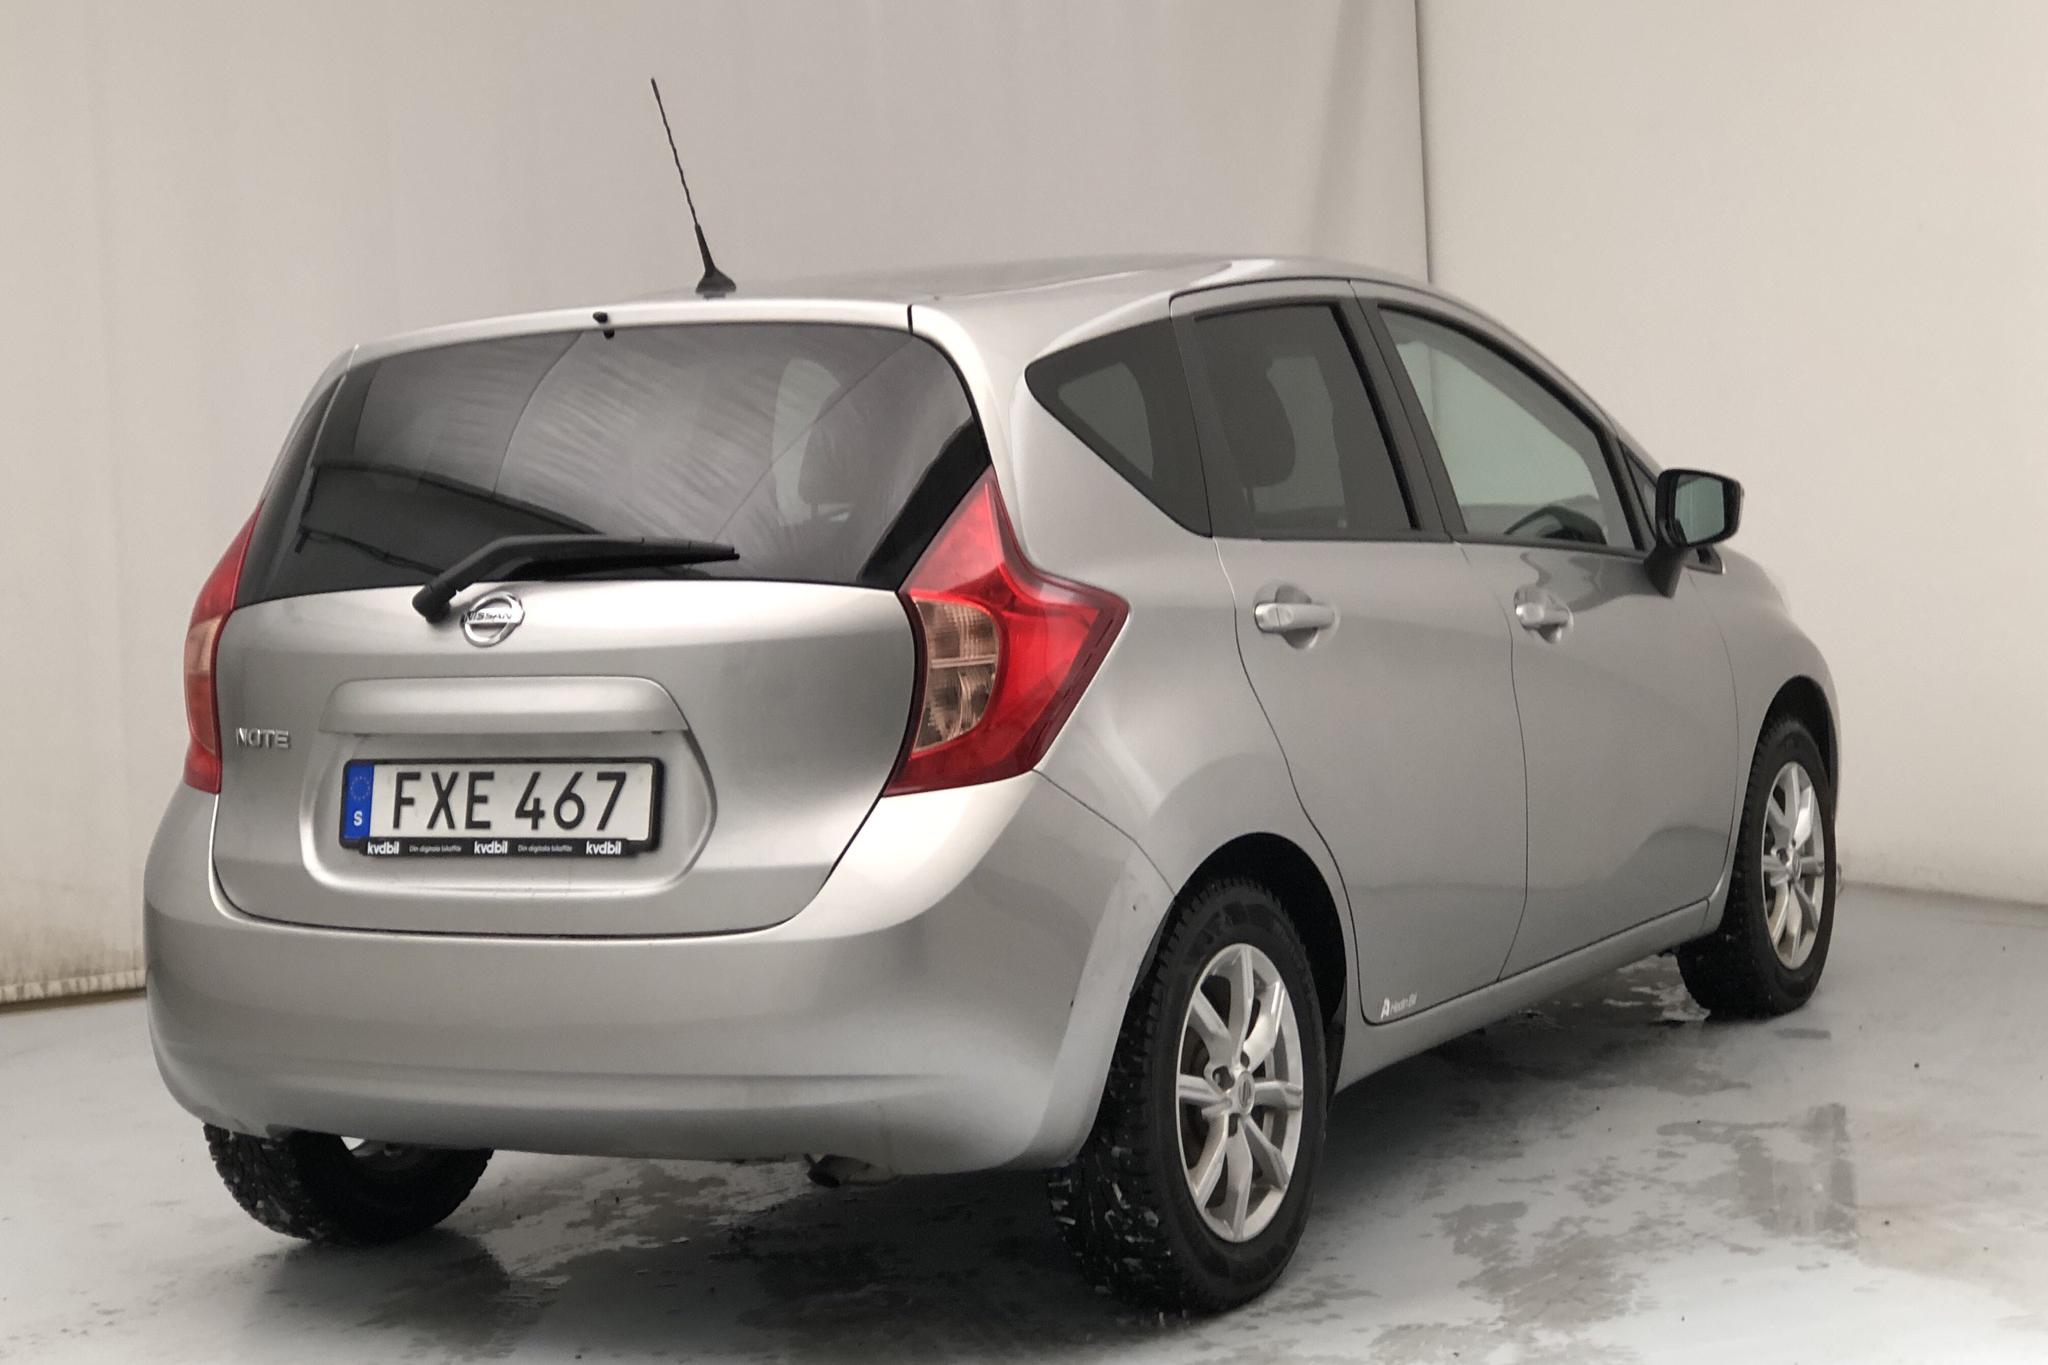 Nissan Note 1.2 (80hk) - 10 000 mil - Manuell - silver - 2015